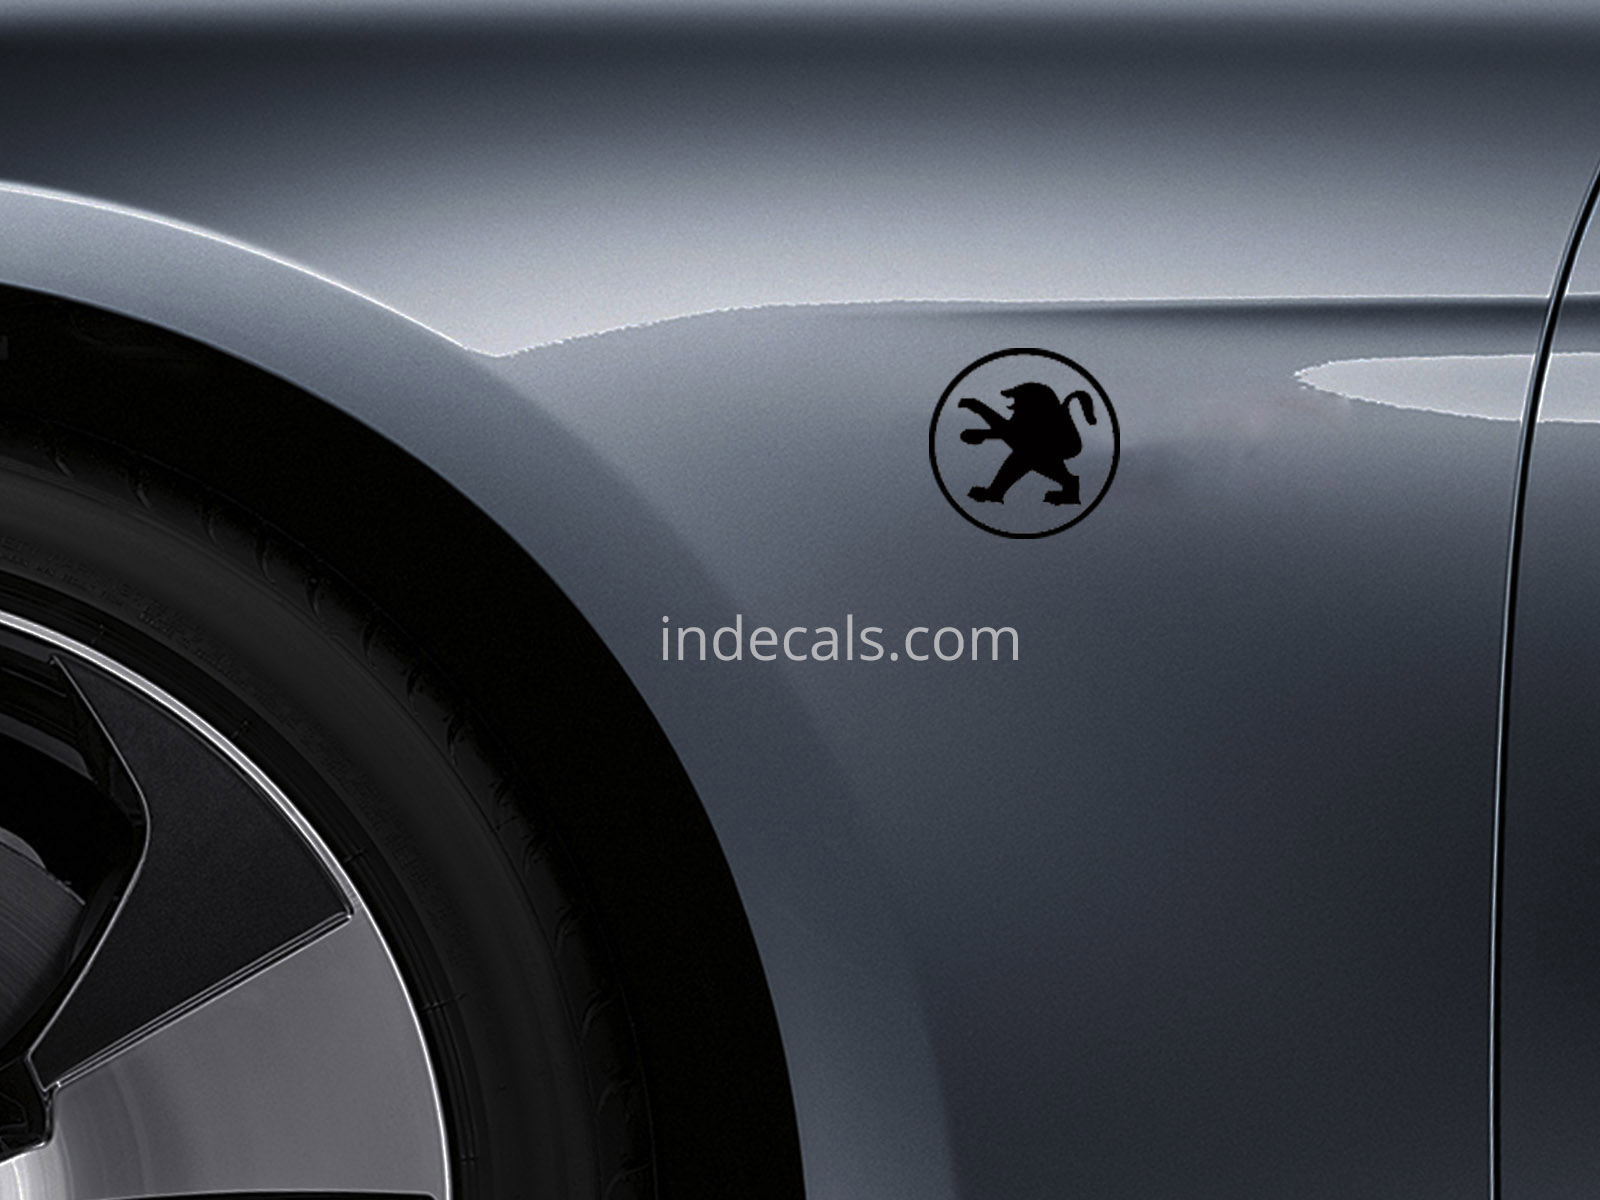 3 x Peugeot Stickers for Wings - Black